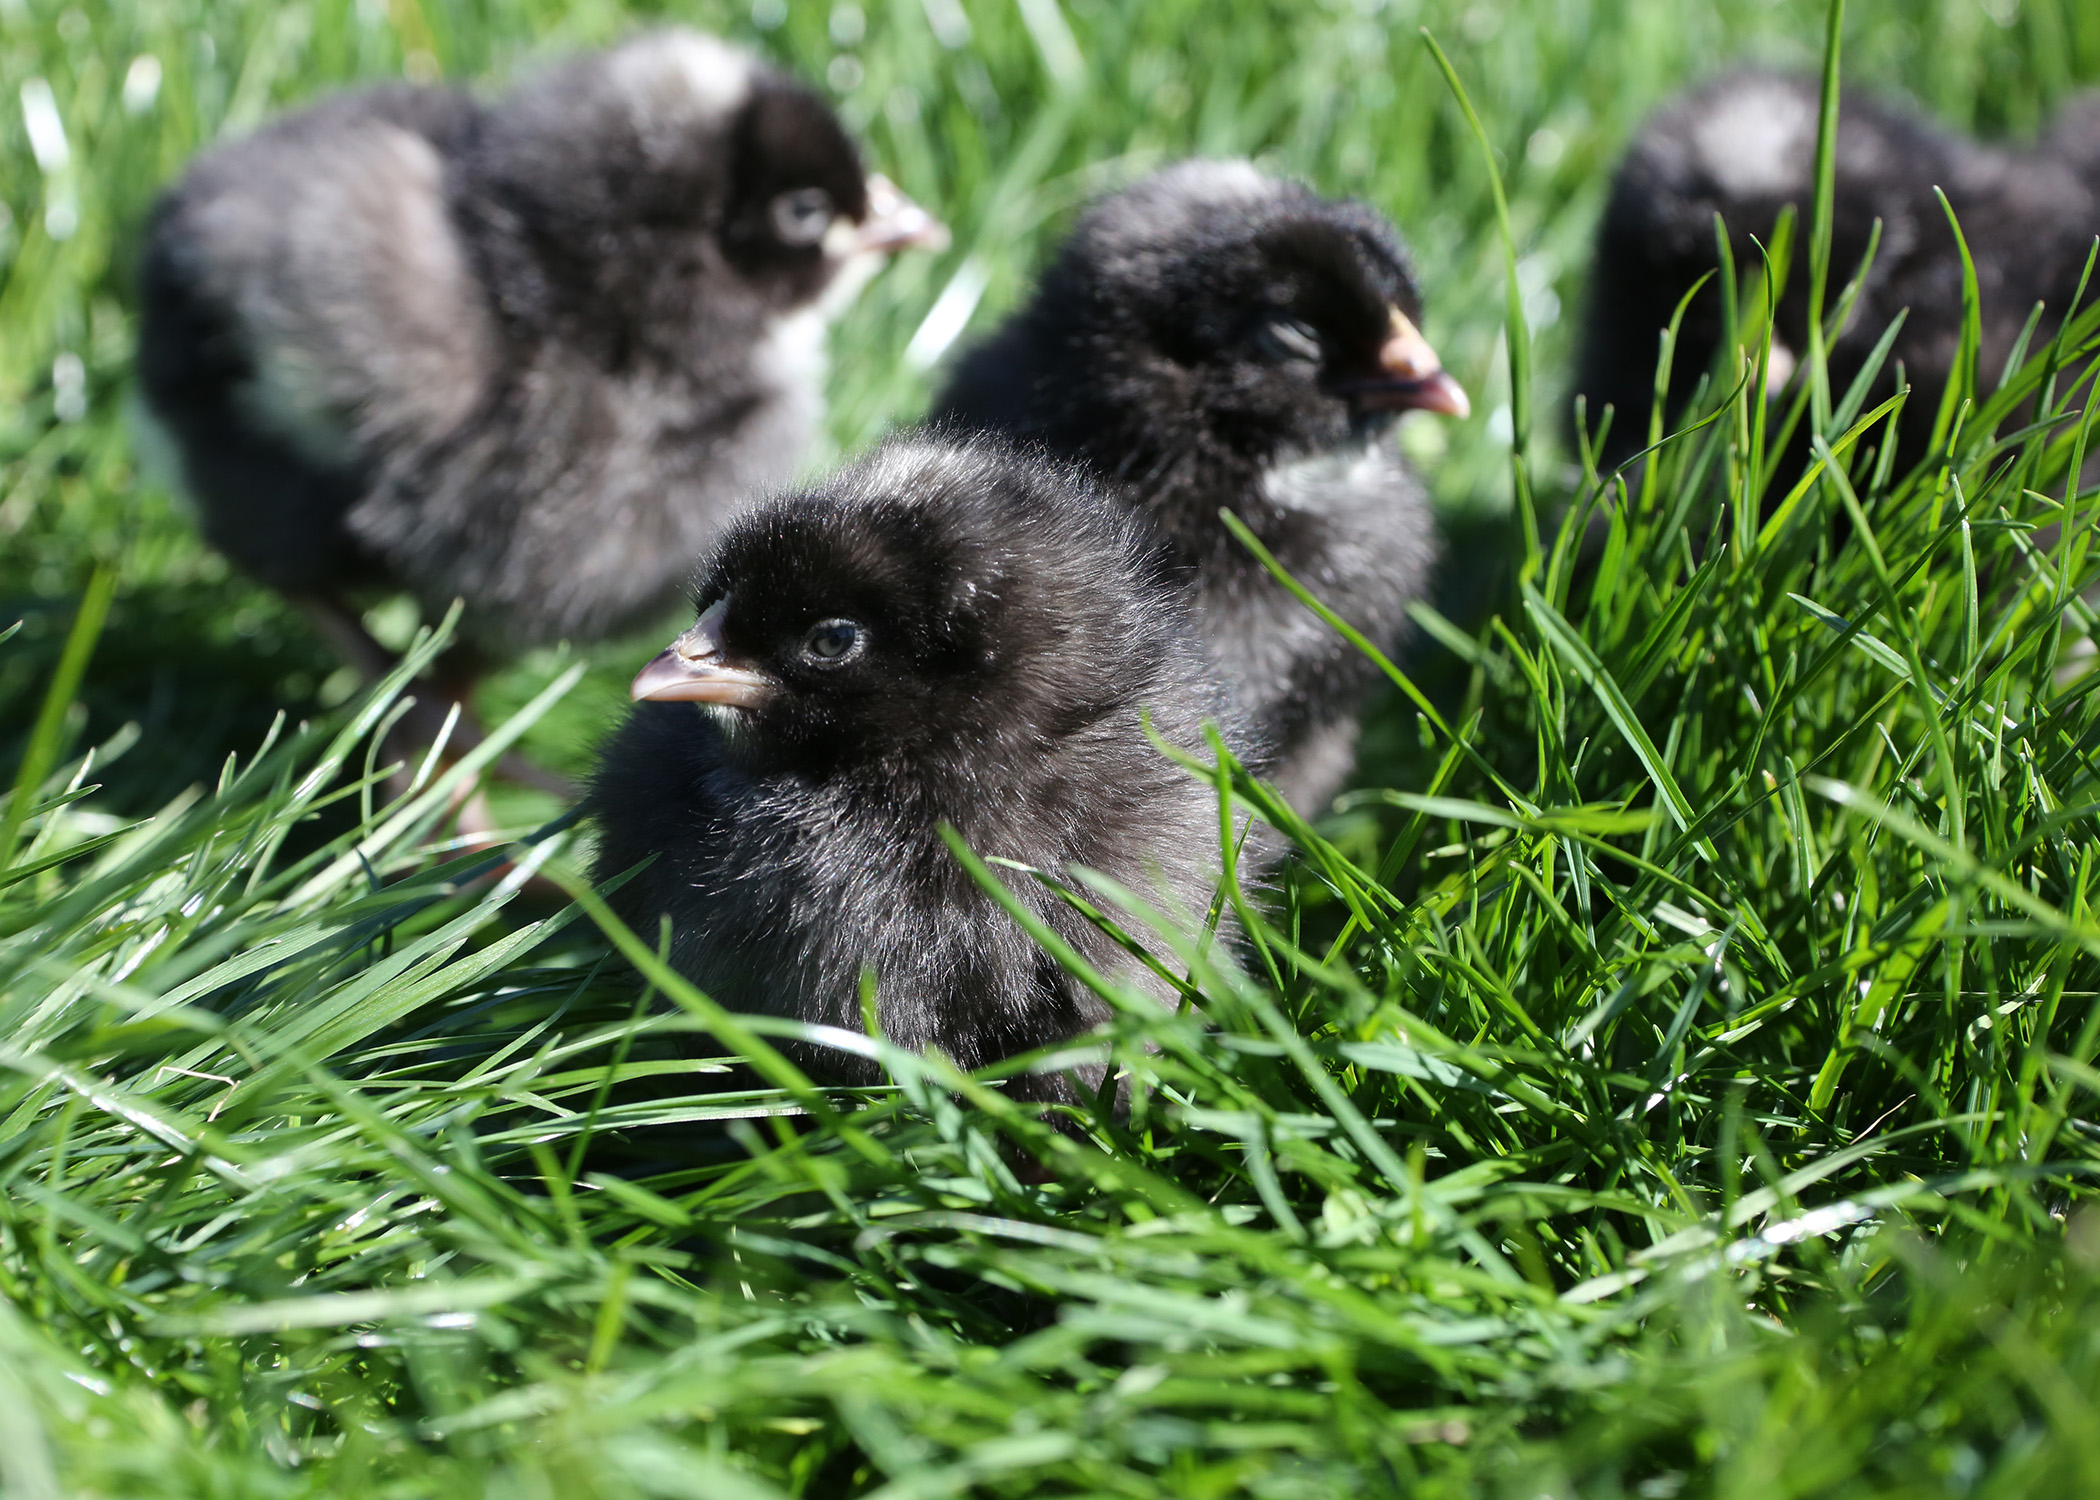 Young chicks covered in gray and black down explore green grass on a sunny day.